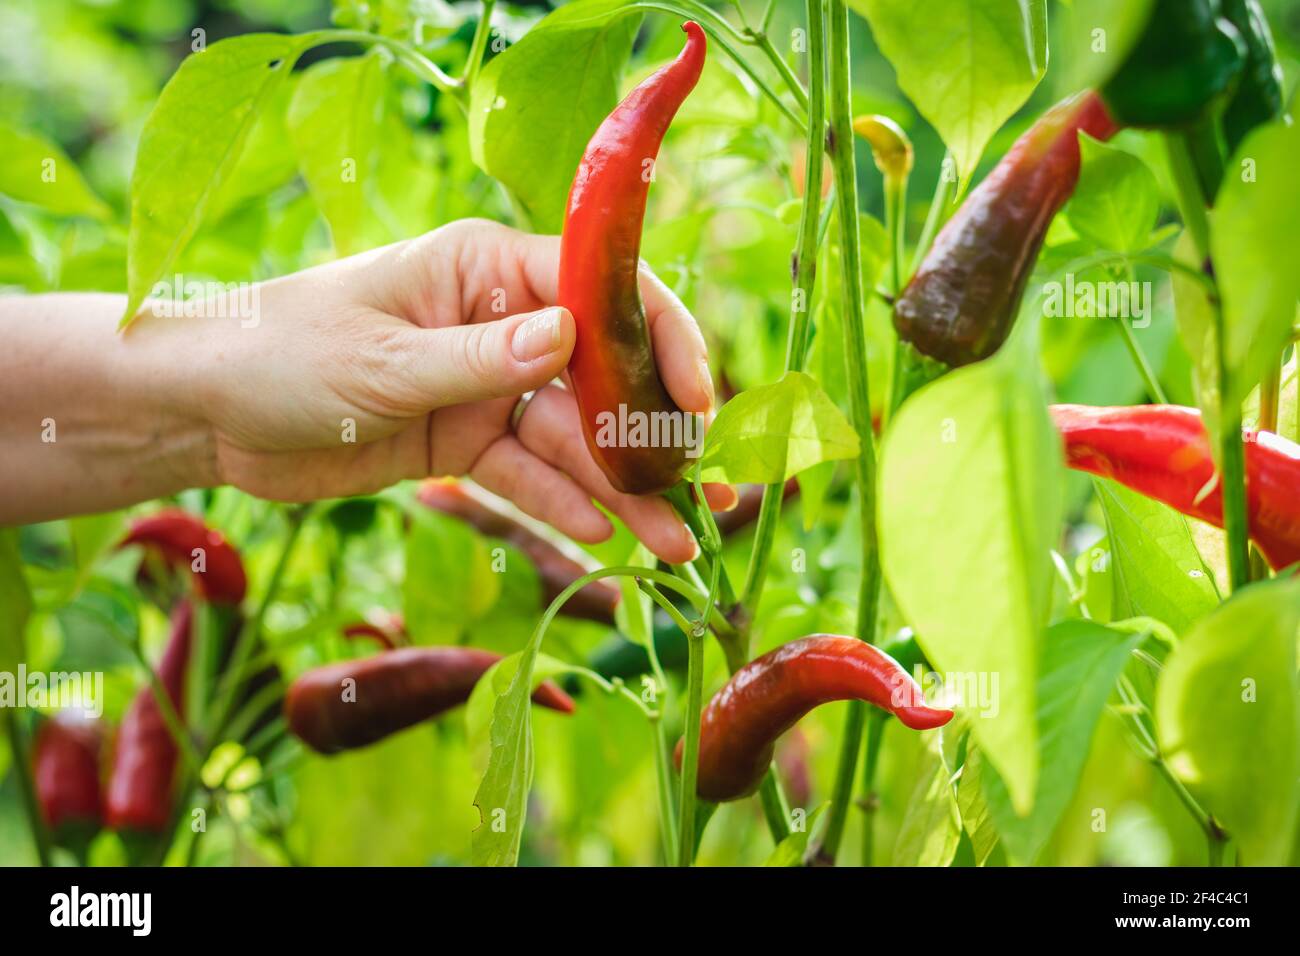 Farmer is harvesting red peppers from her organic garden. Chili peppers in vegetable garden Stock Photo